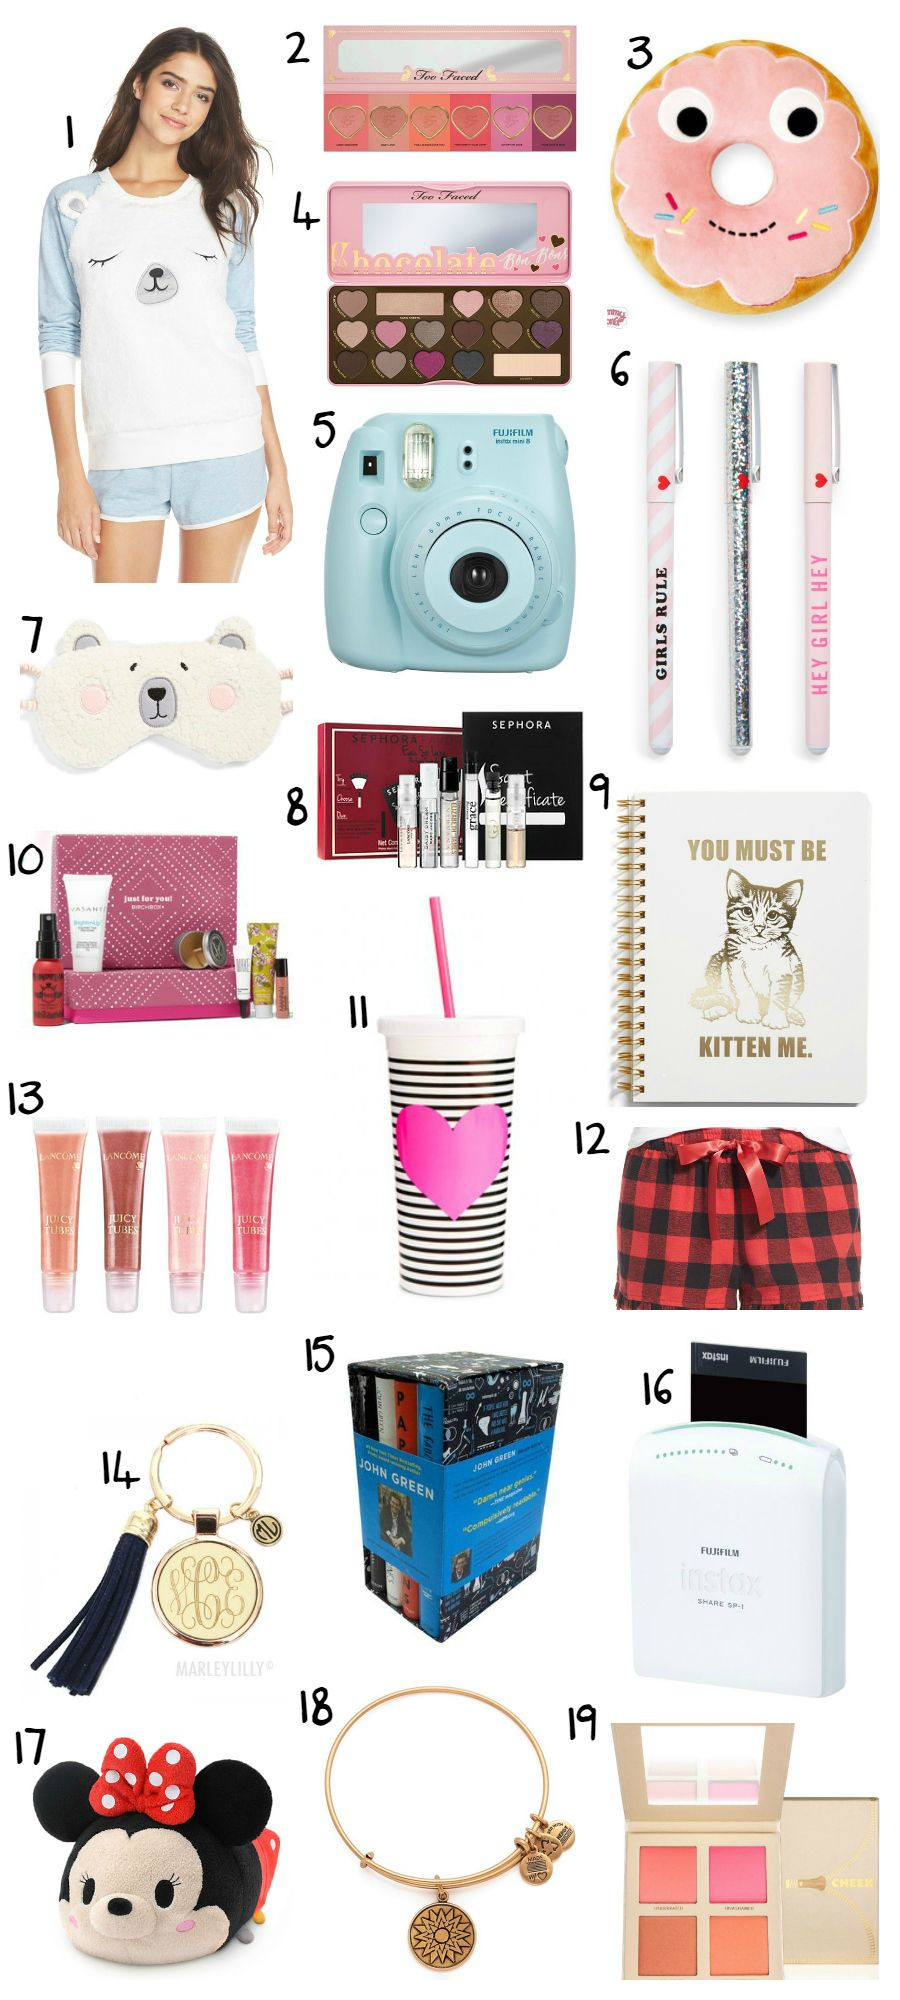 Good Gift Ideas For Girls
 The Best Christmas Gift Ideas for Teens